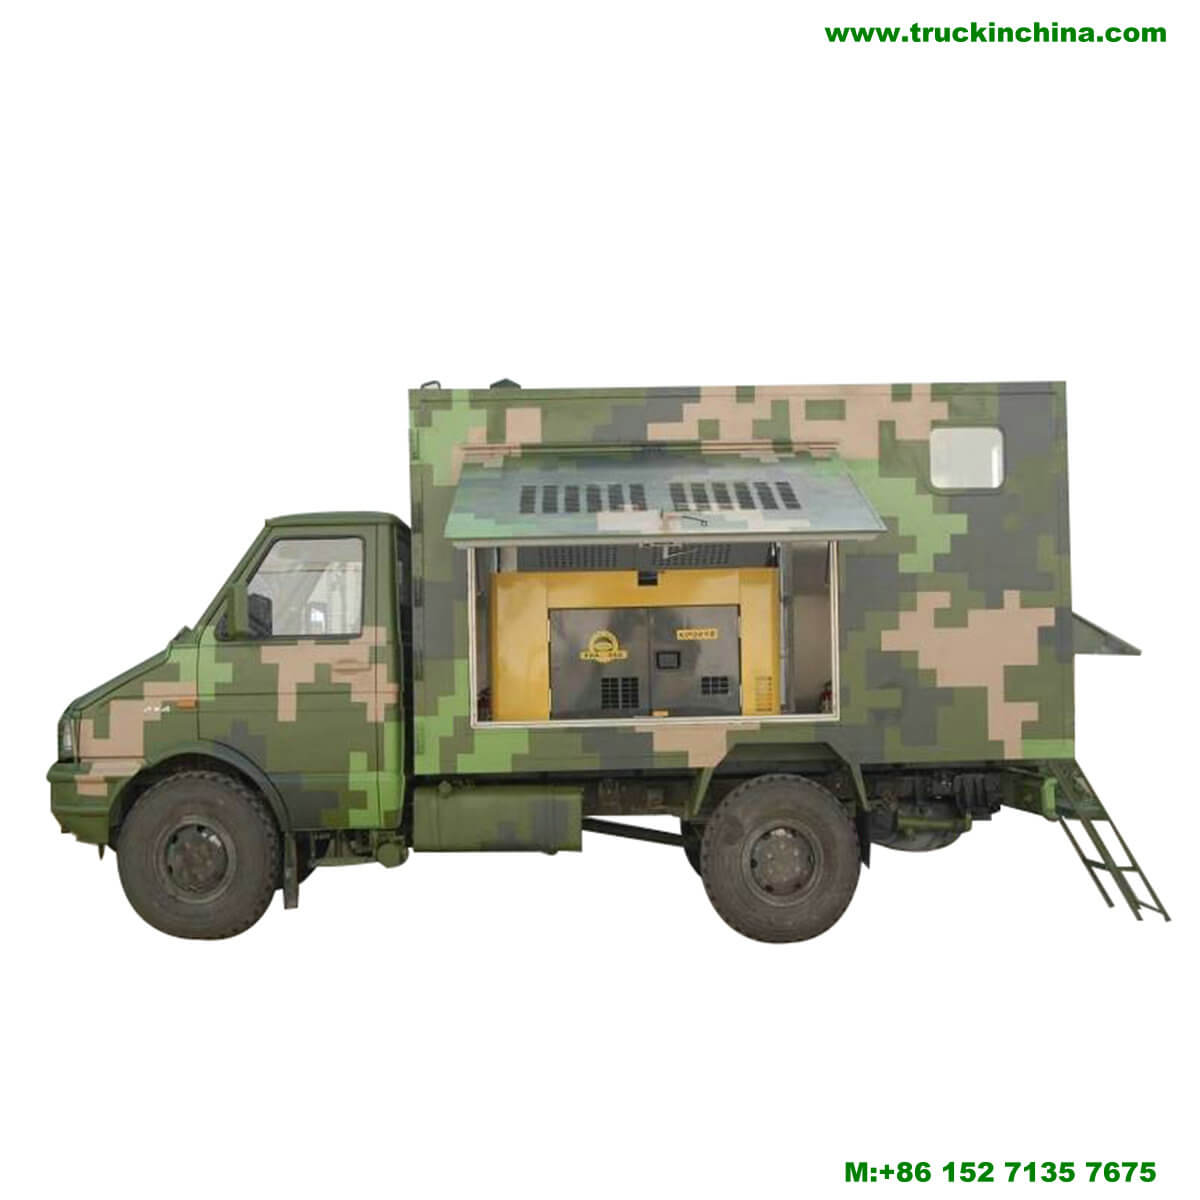 IVECO Mobile Generator Vehicle Offroad 4x4 Customizing 